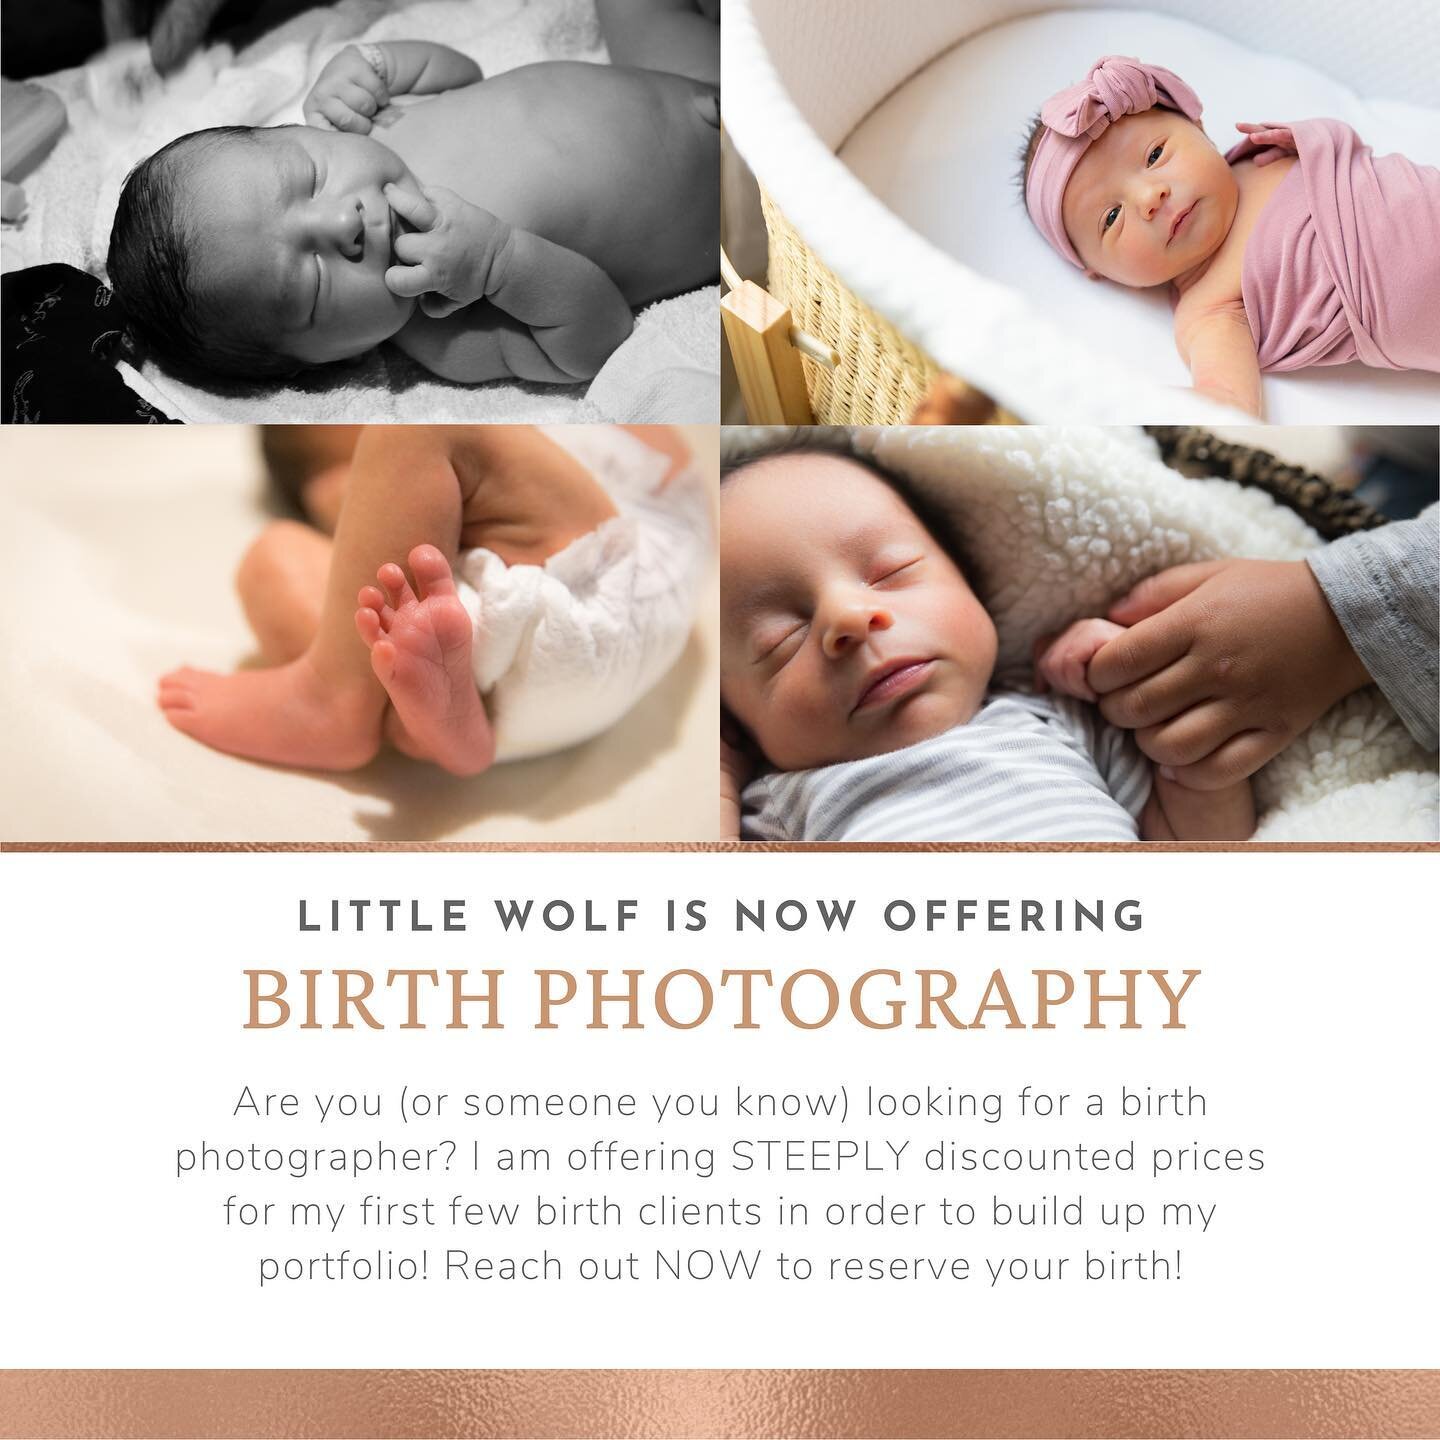 I am SO excited to announce that I am now offering birth photography! 🤩 

I am offering discounted prices for my first few births, so be sure to reach out quick to book your birth with me, and be sure to share this post with friends/family! 

I of c